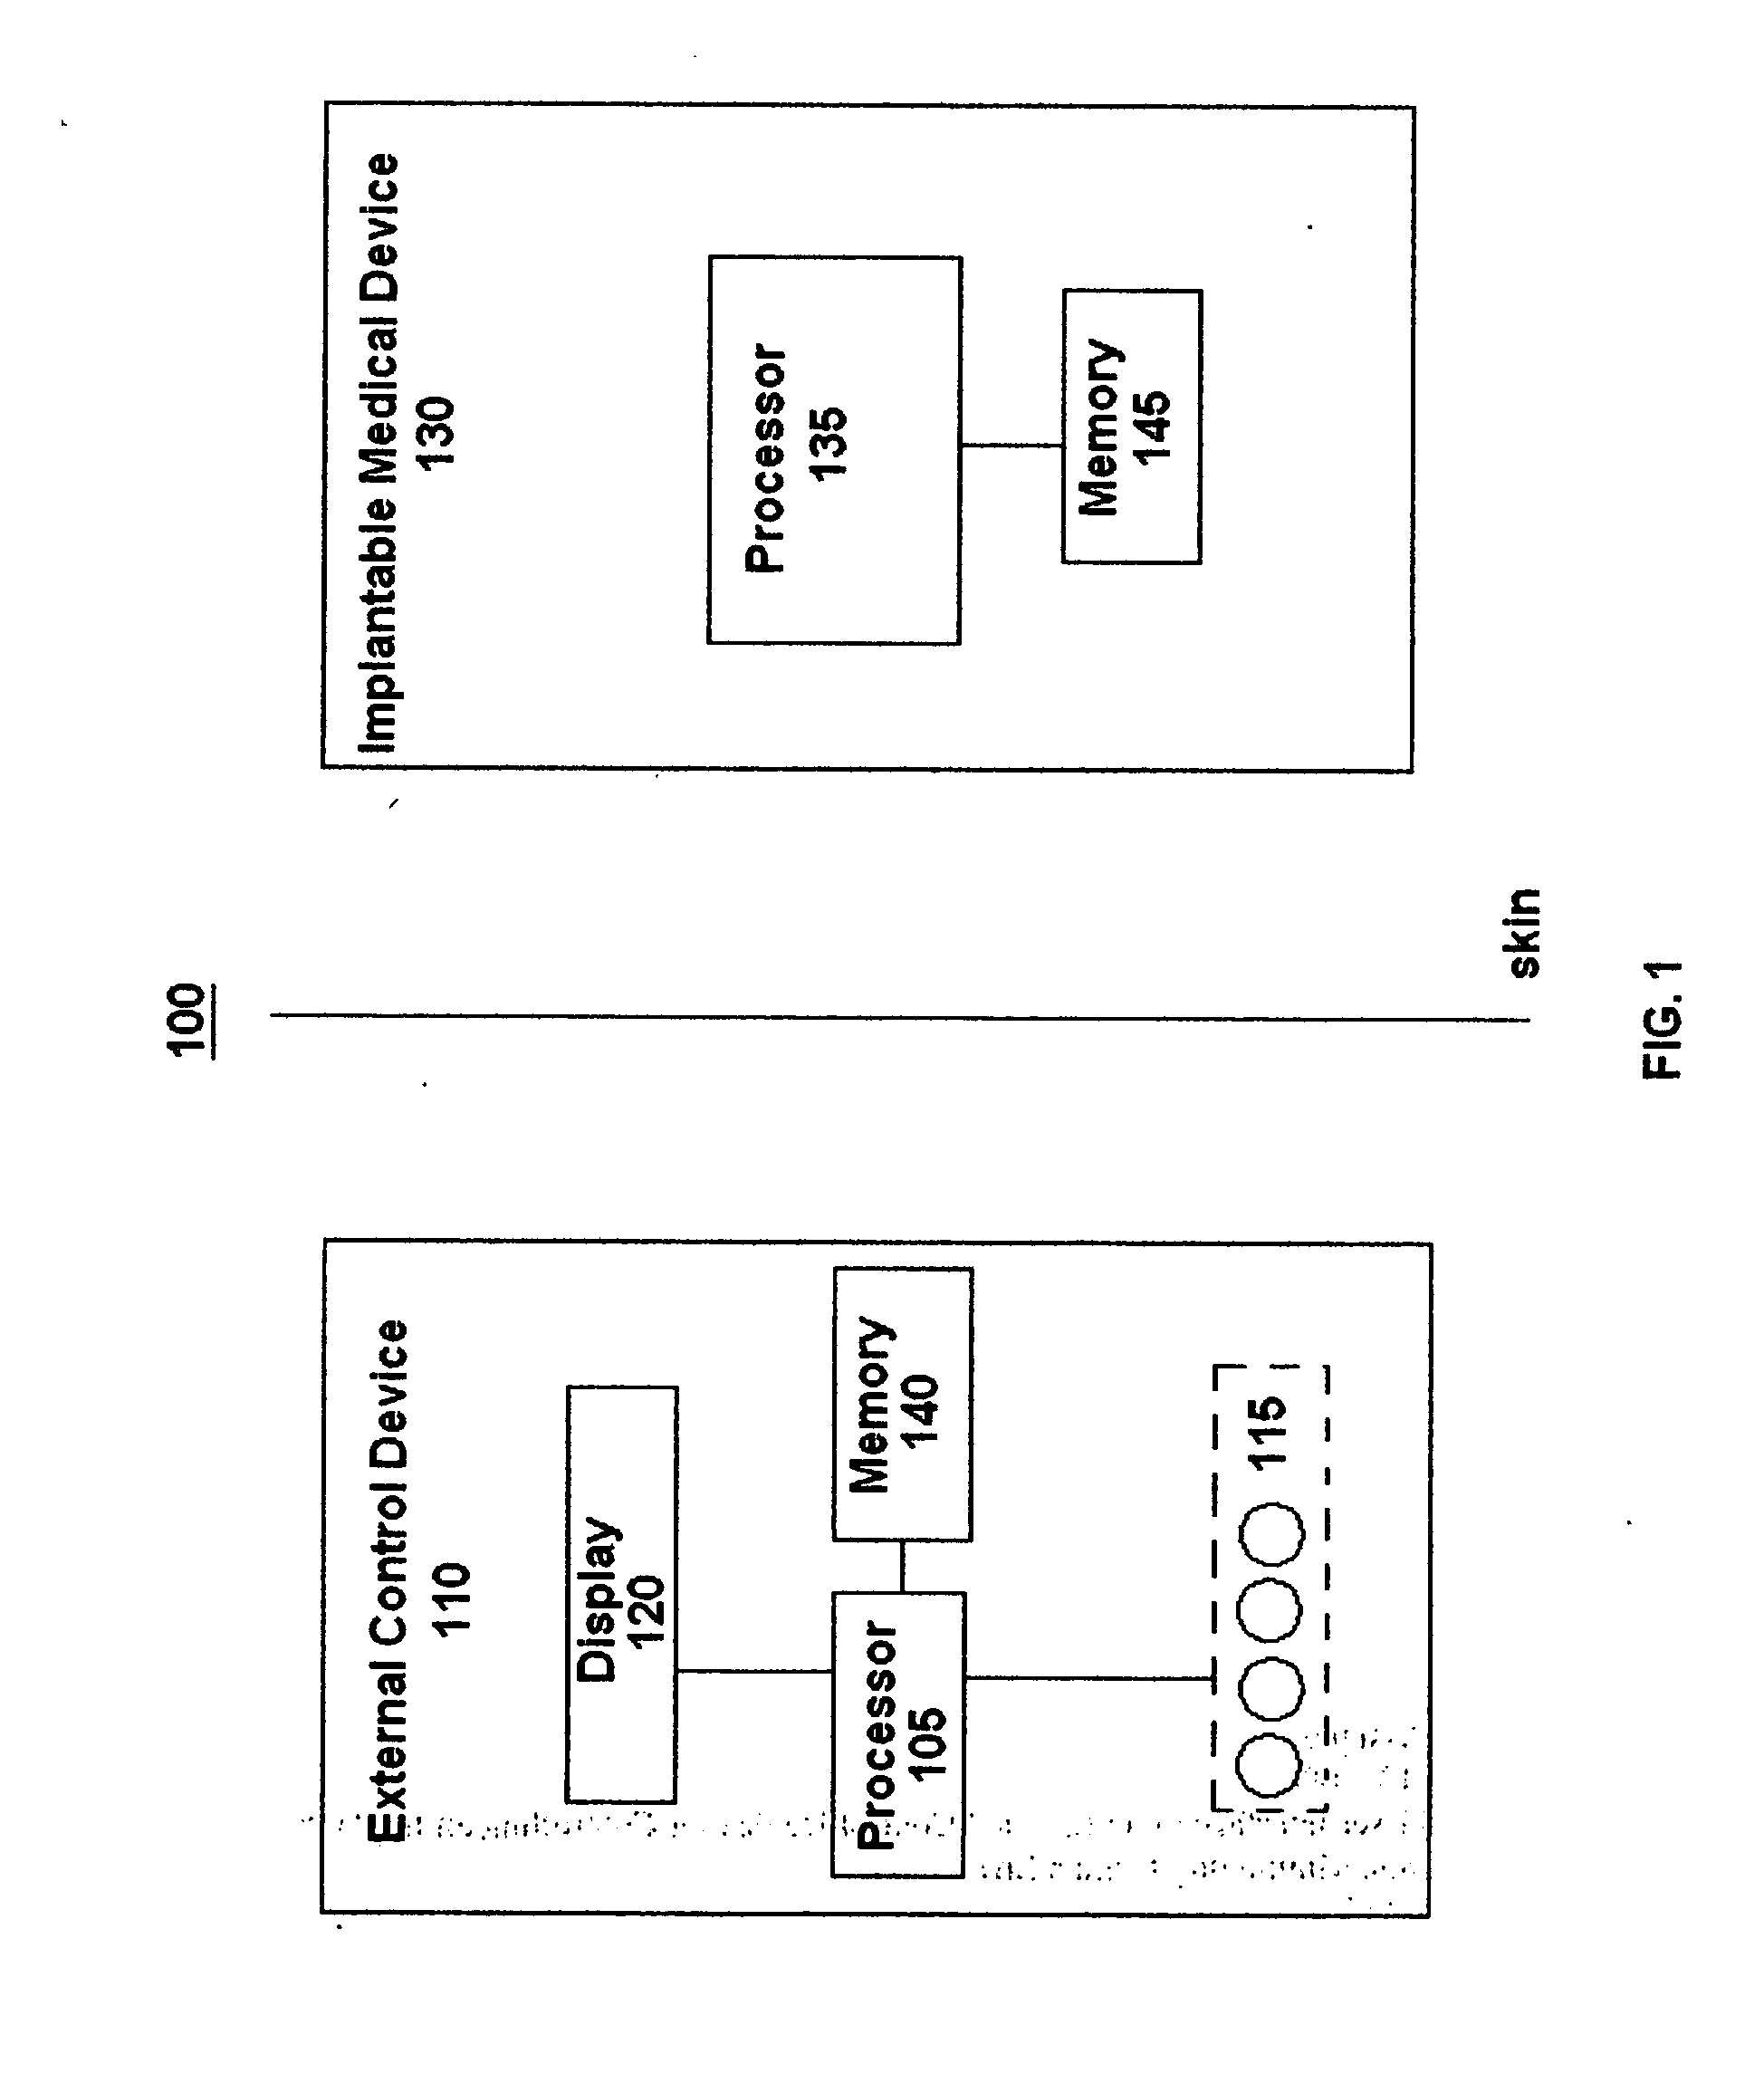 Graphical user interface of an external control device for controlling an implantable medical device while minimizing human error